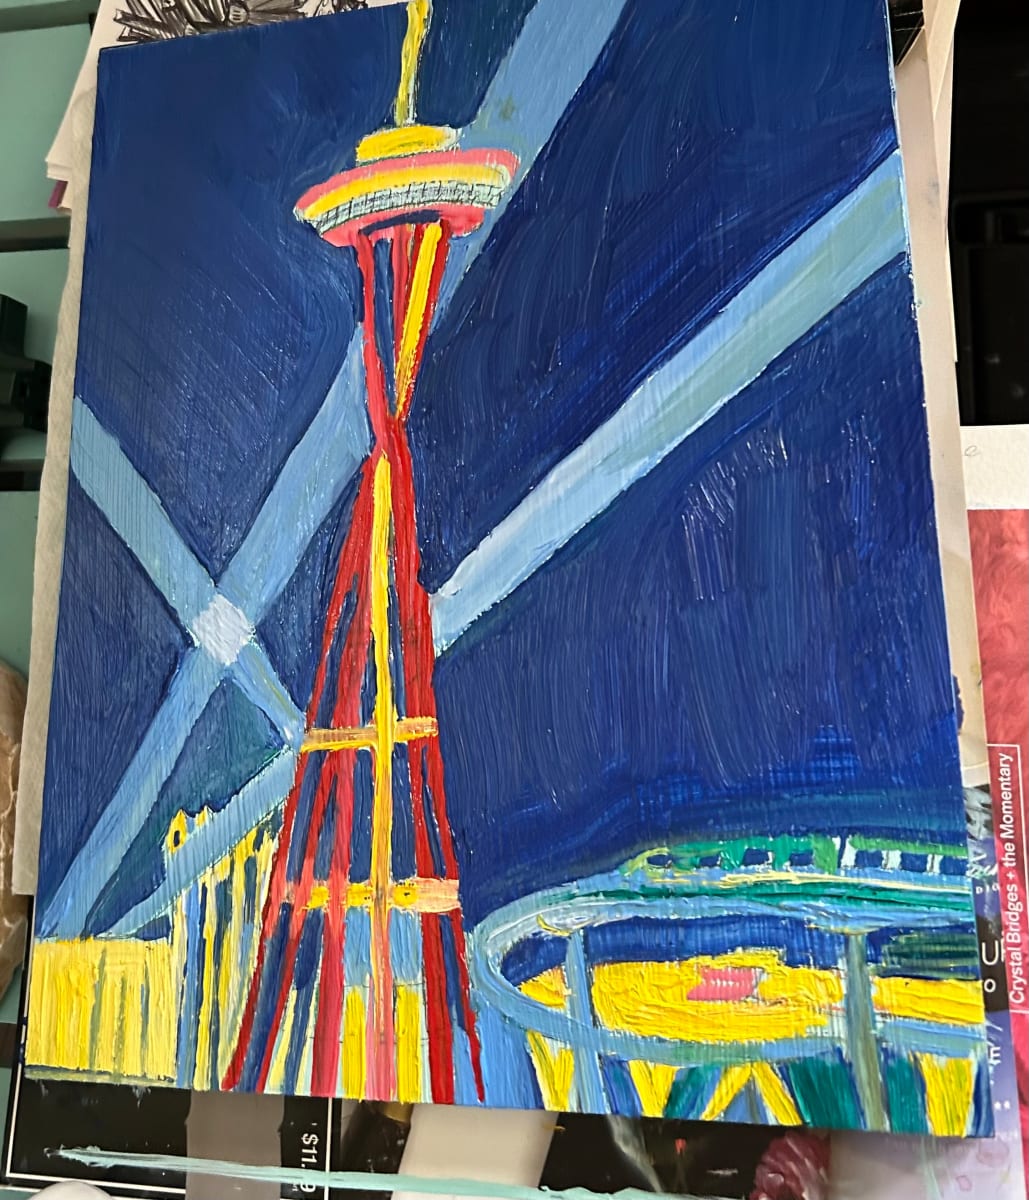 Seattle Space Needle 1962 by Janet Borders  Image: Love Space Needle 